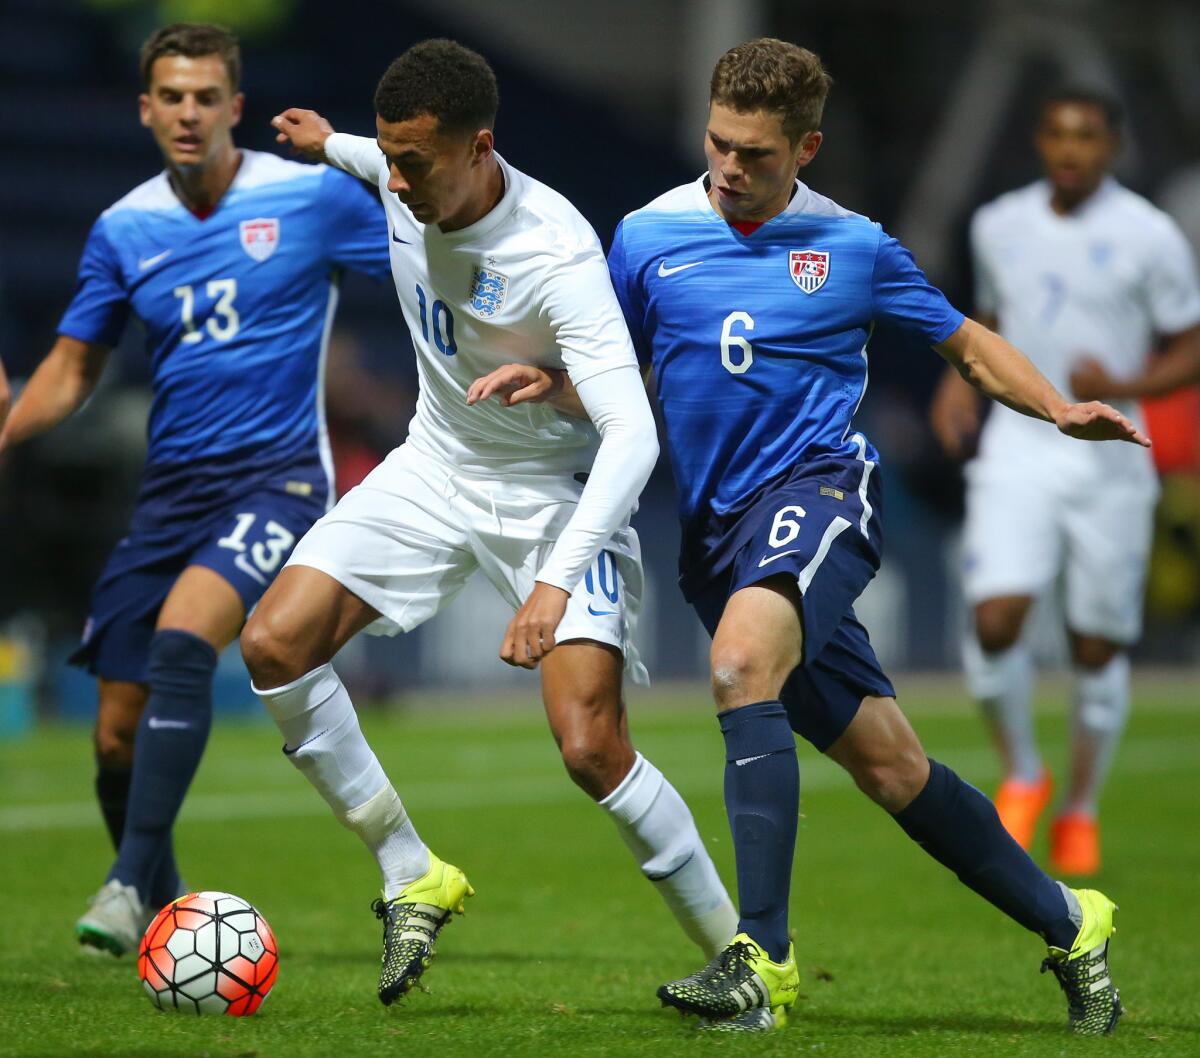 England's Dele Ali is challenged by Wil Trapp of USA during the International friendly match between England U21 and USA U23 on Sept. 3 in Preston, England.